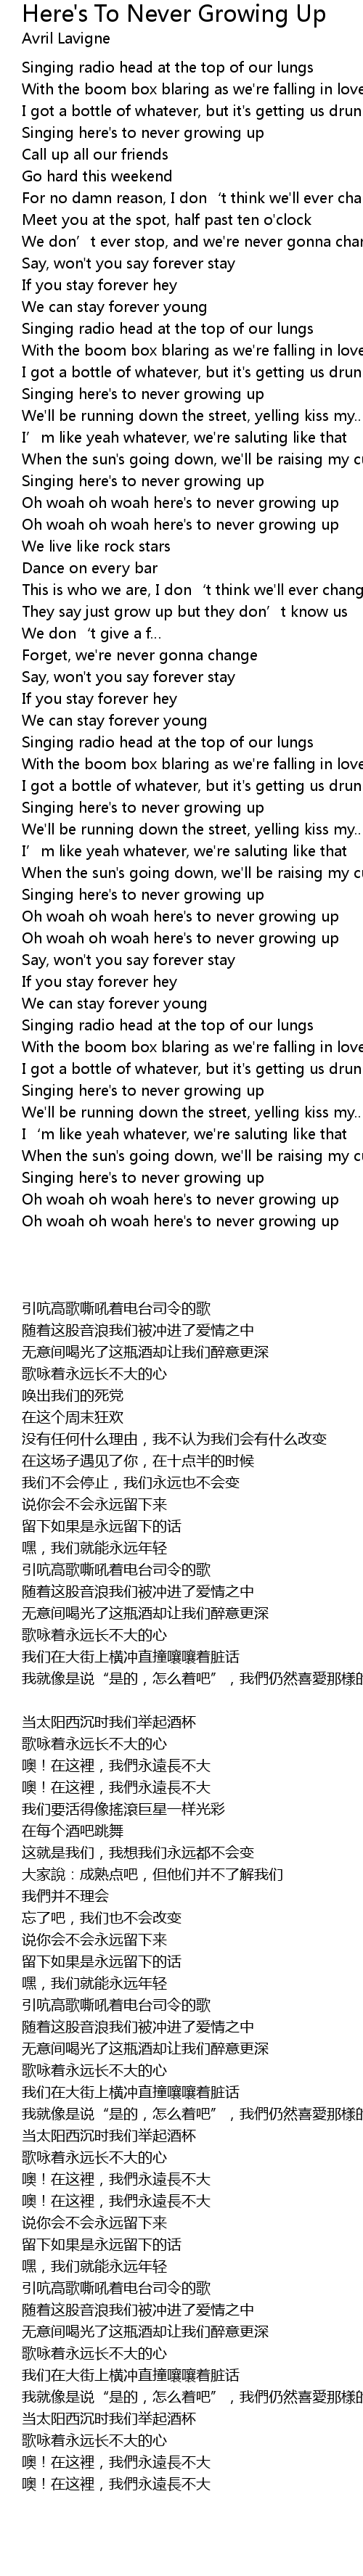 CapCut_here's to never growing up lyrics